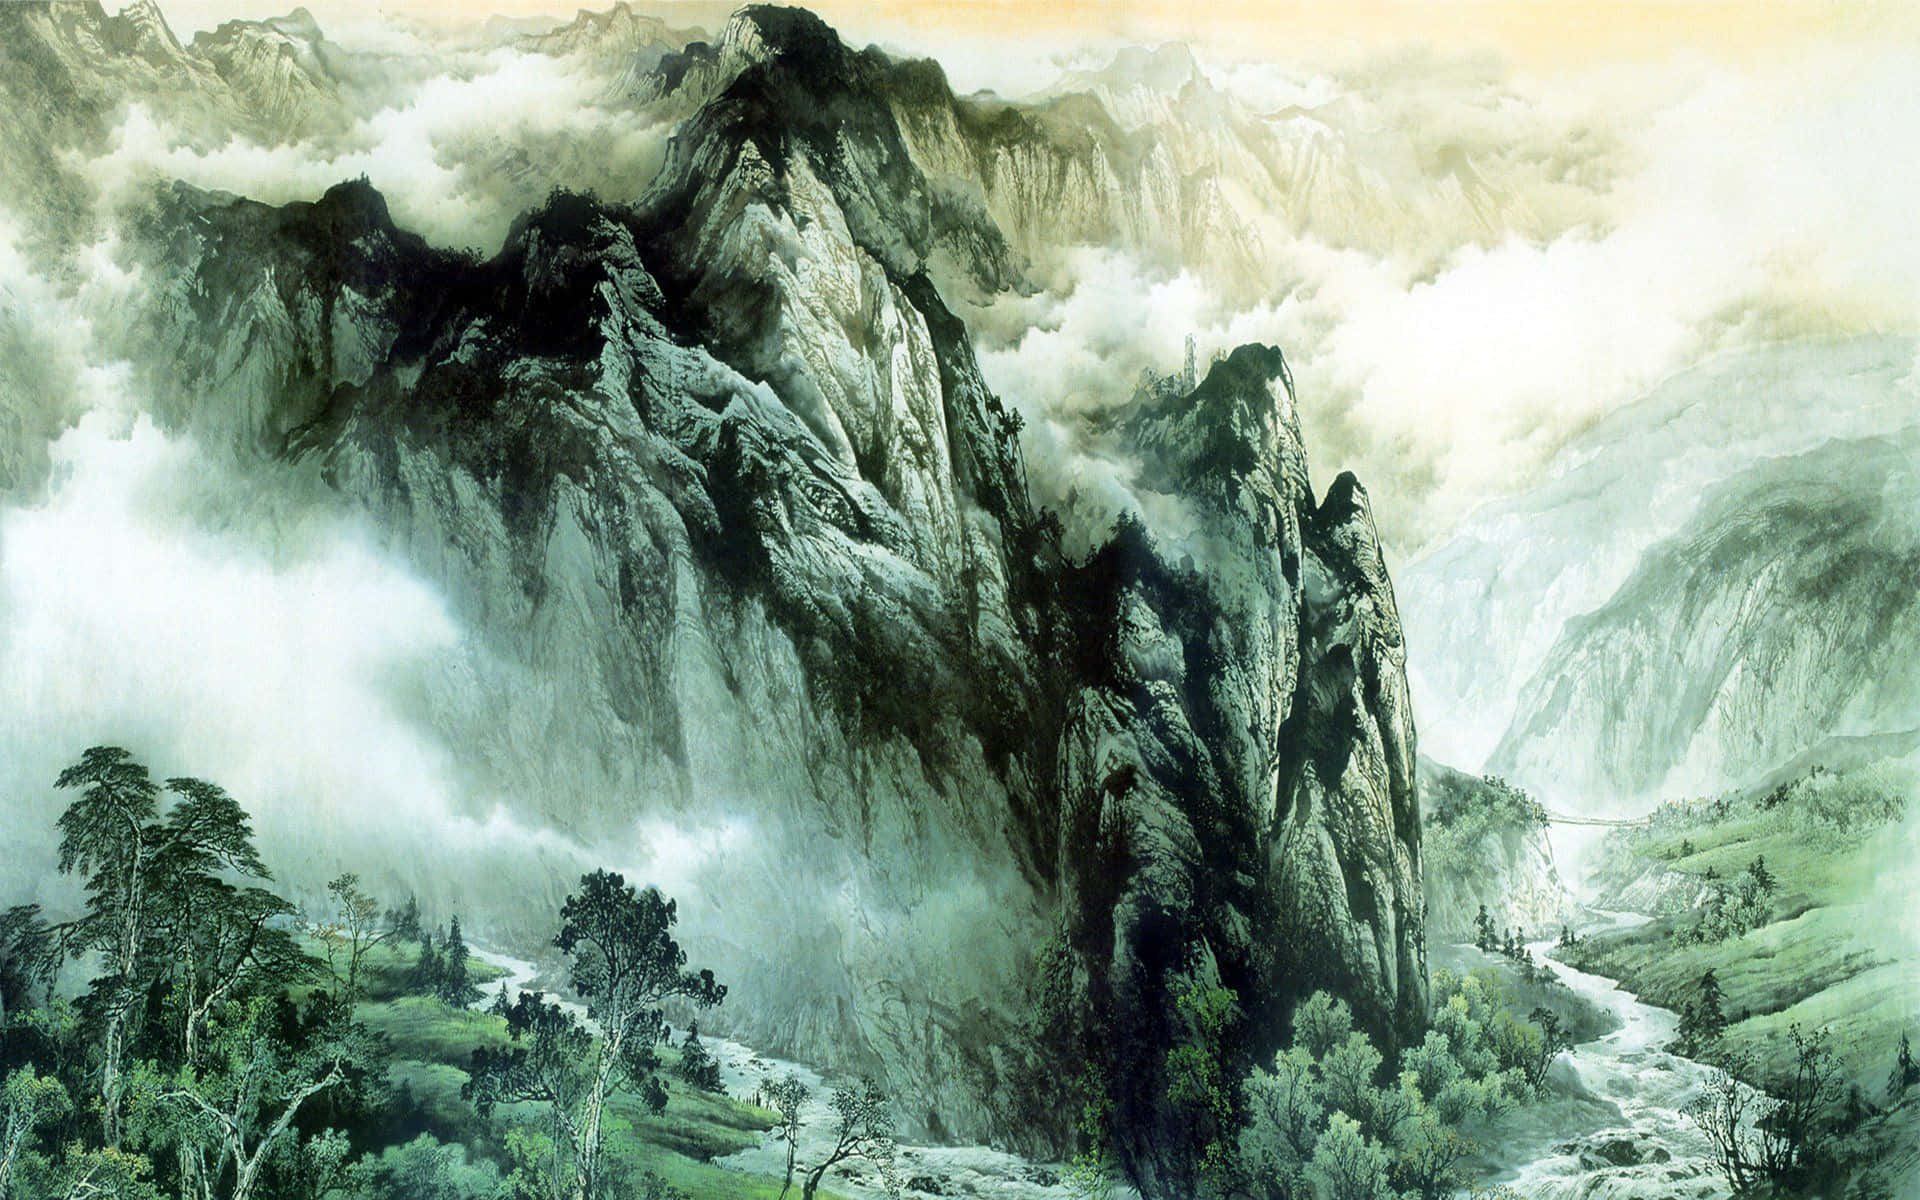 A Painting Of A Mountain With Clouds And A River